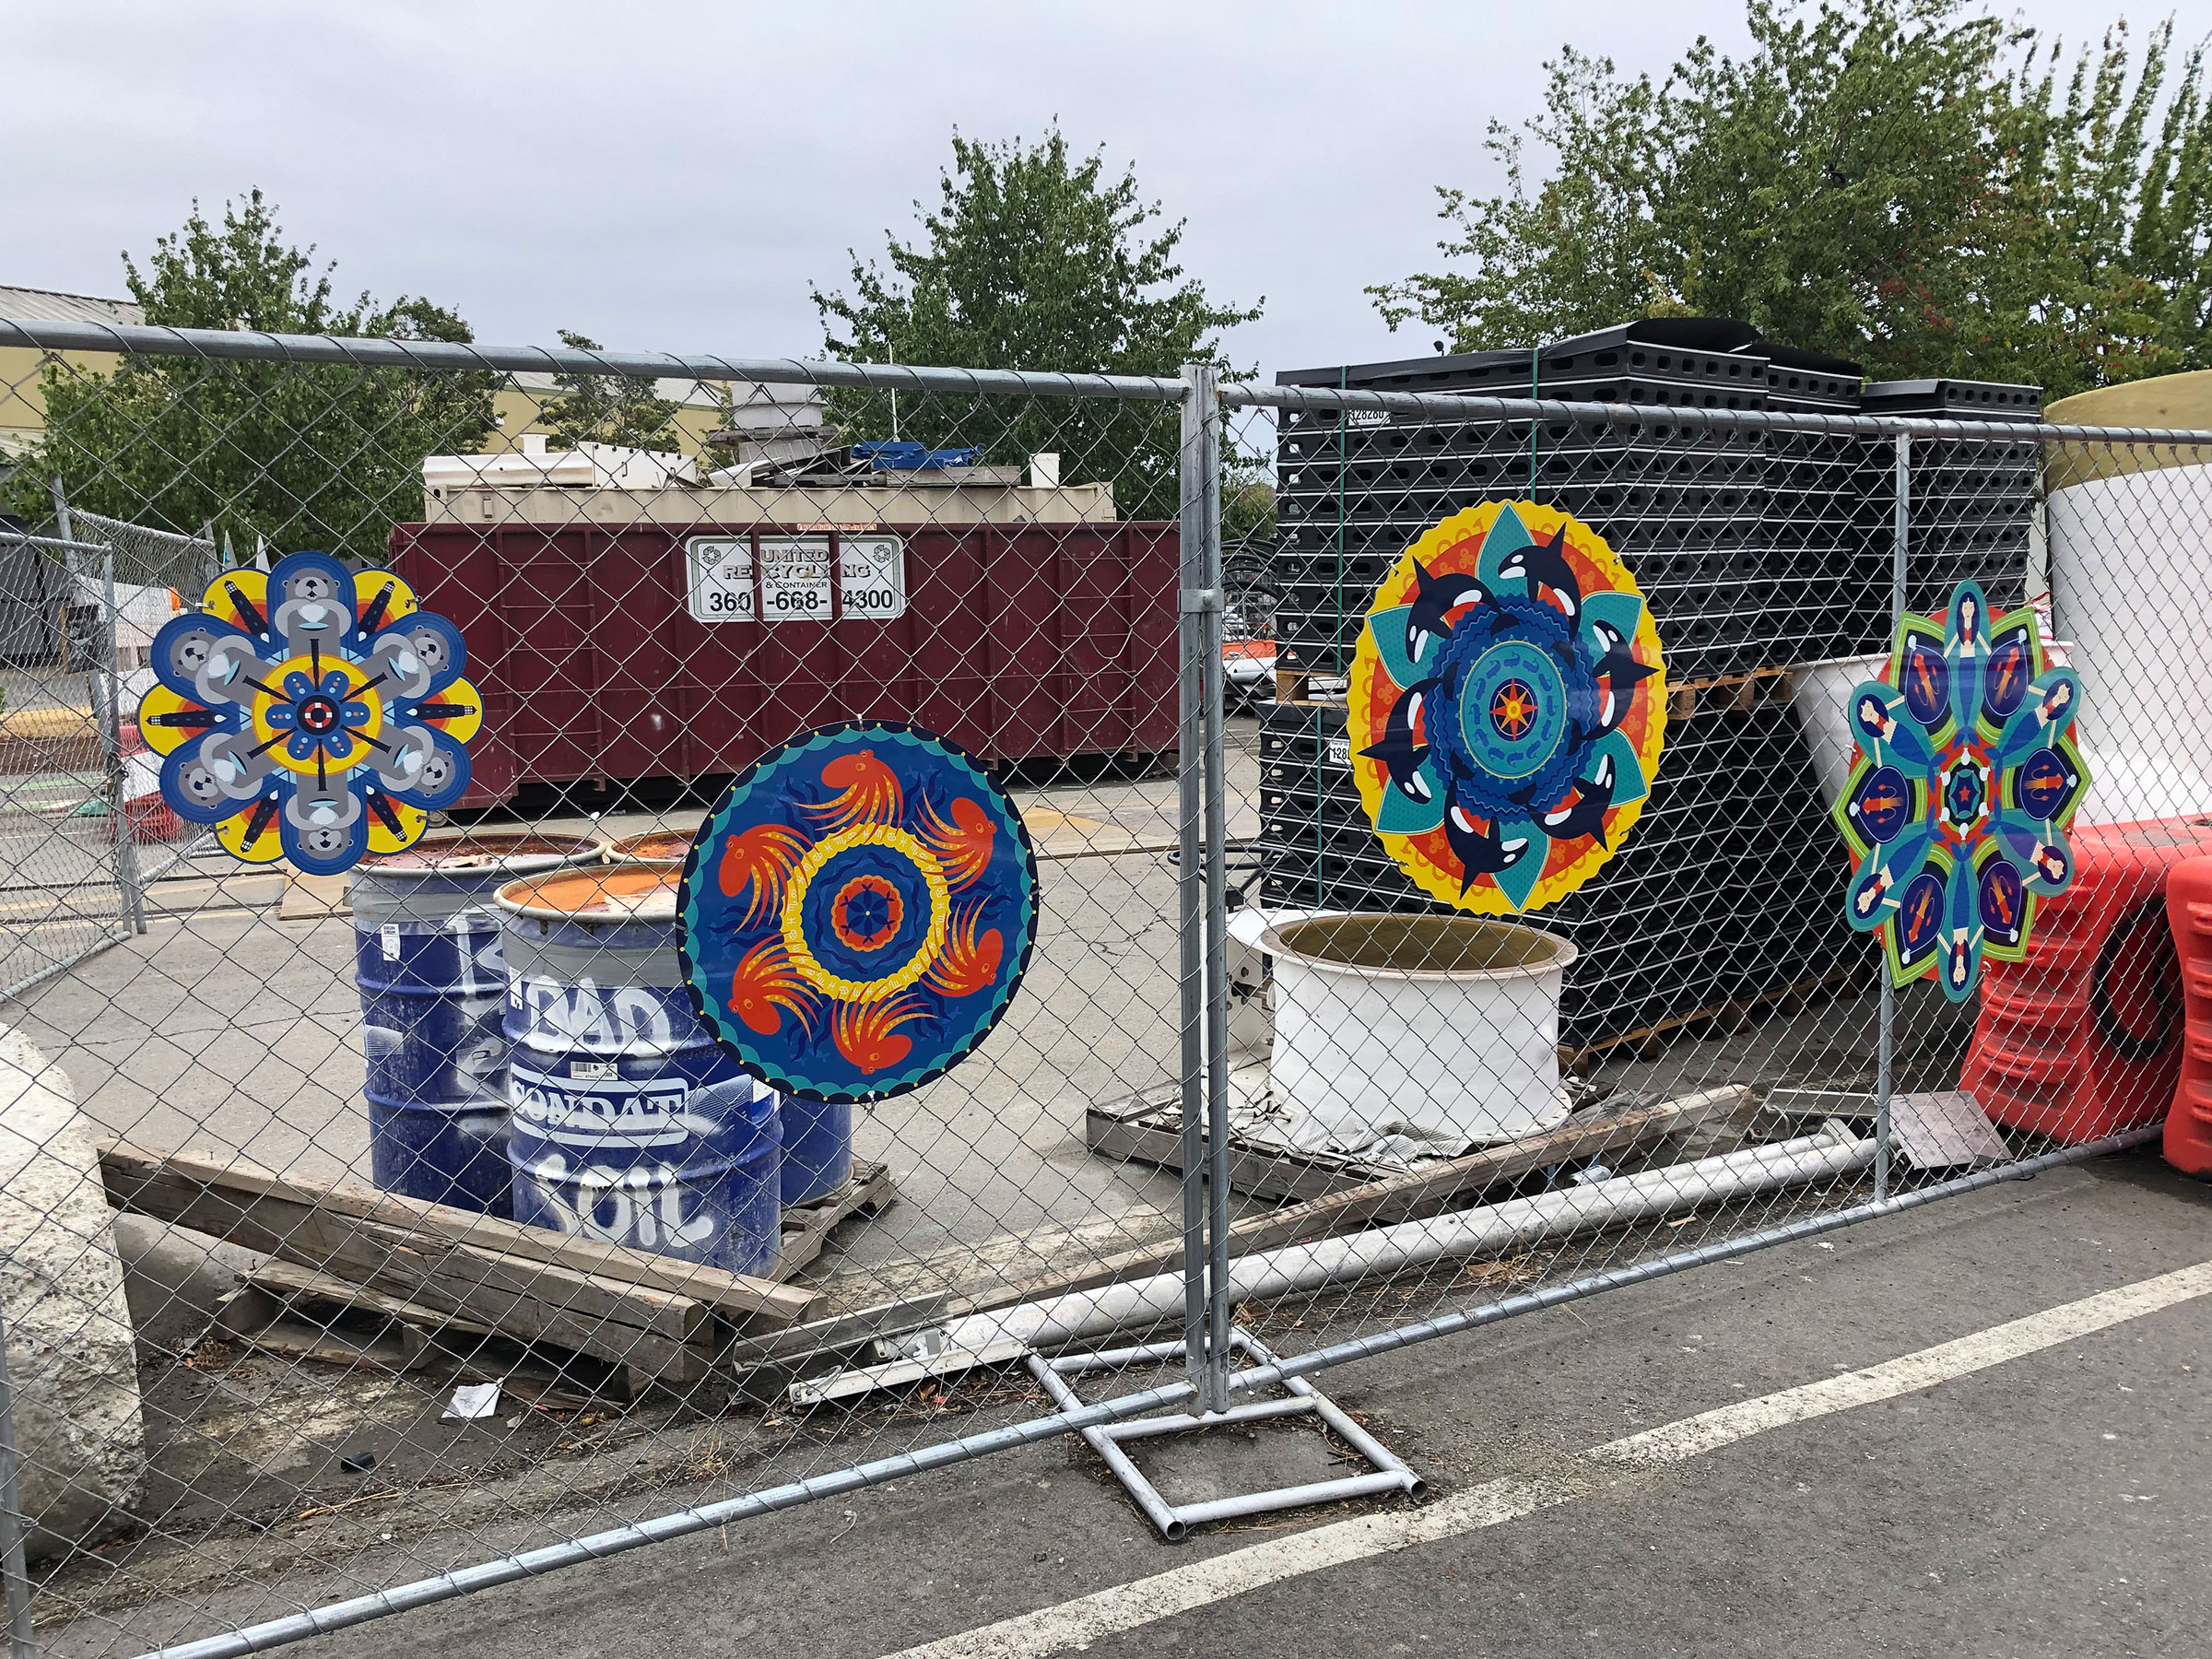 Four kaleidoscope-style medallions that highlight aquatic icons using primarily blue, red and yellow colors. They are secured to a chain link fence with construction materials in the background.